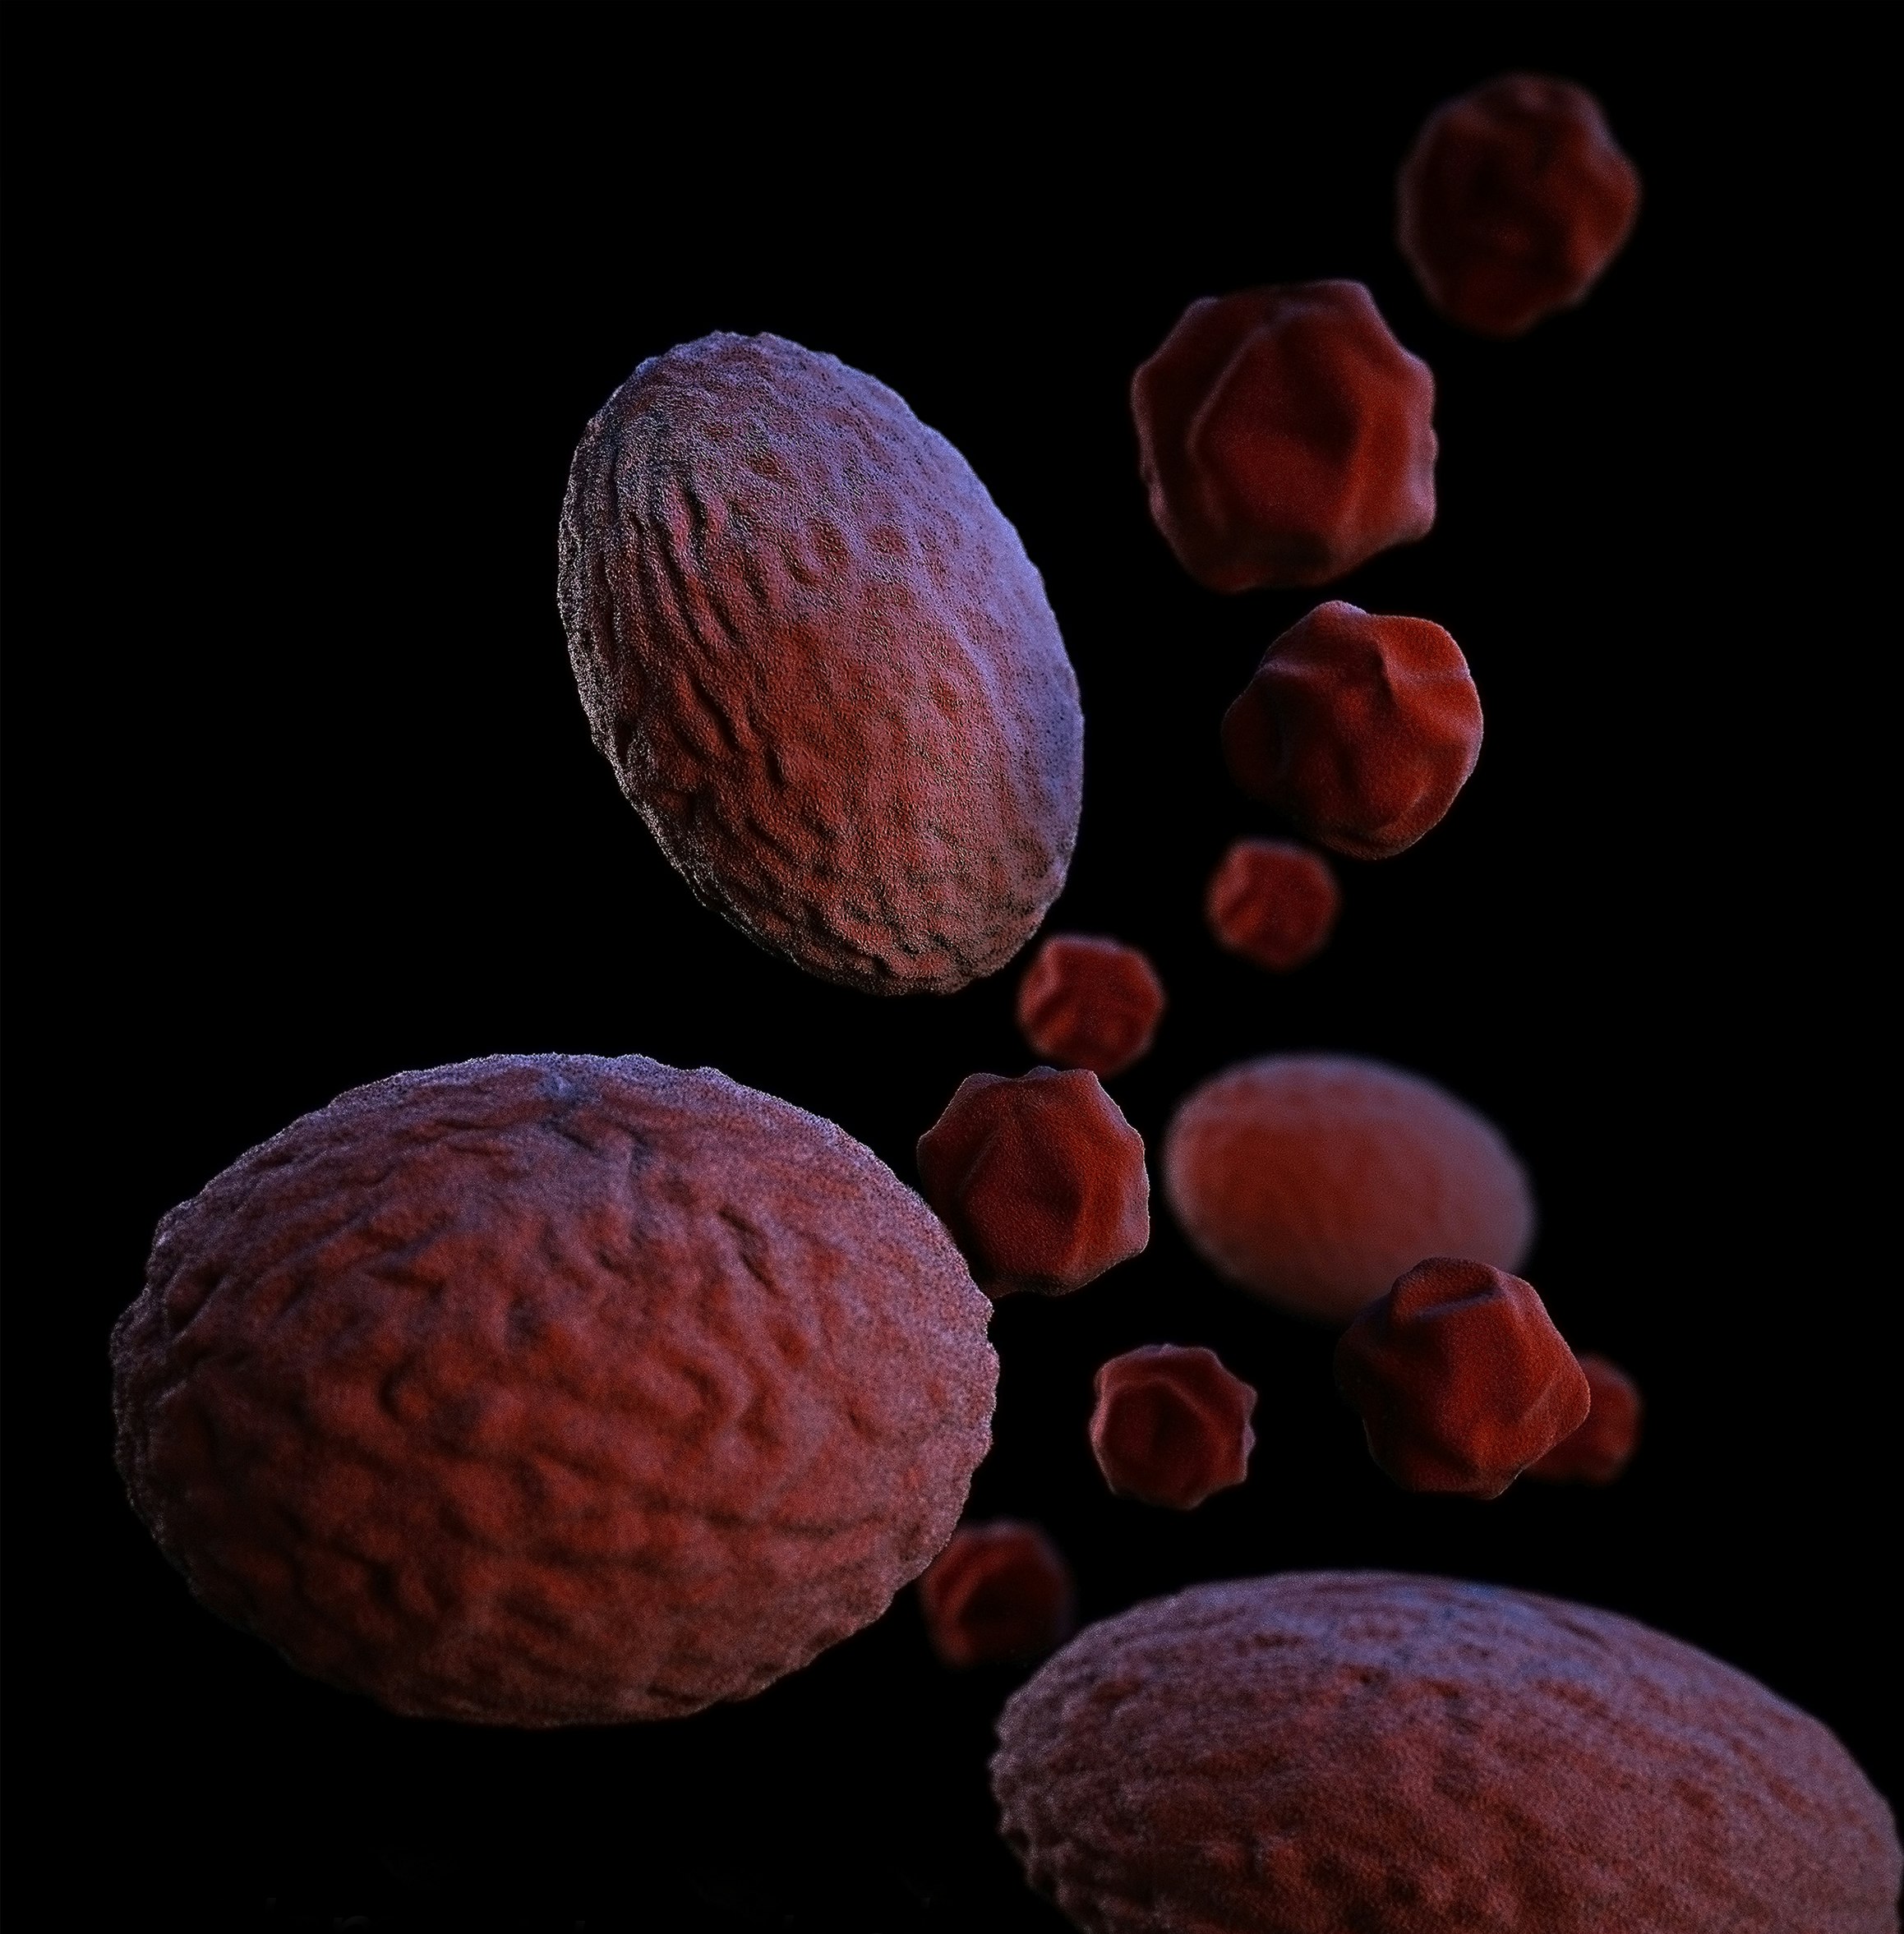 This illustration depicted a three-dimensional (3D), computer-generated image, of a group of Gram-negative, Chlamydia psittaci bacteria. The artistic recreation was based upon scanning electron microscopic (SEM) imagery.